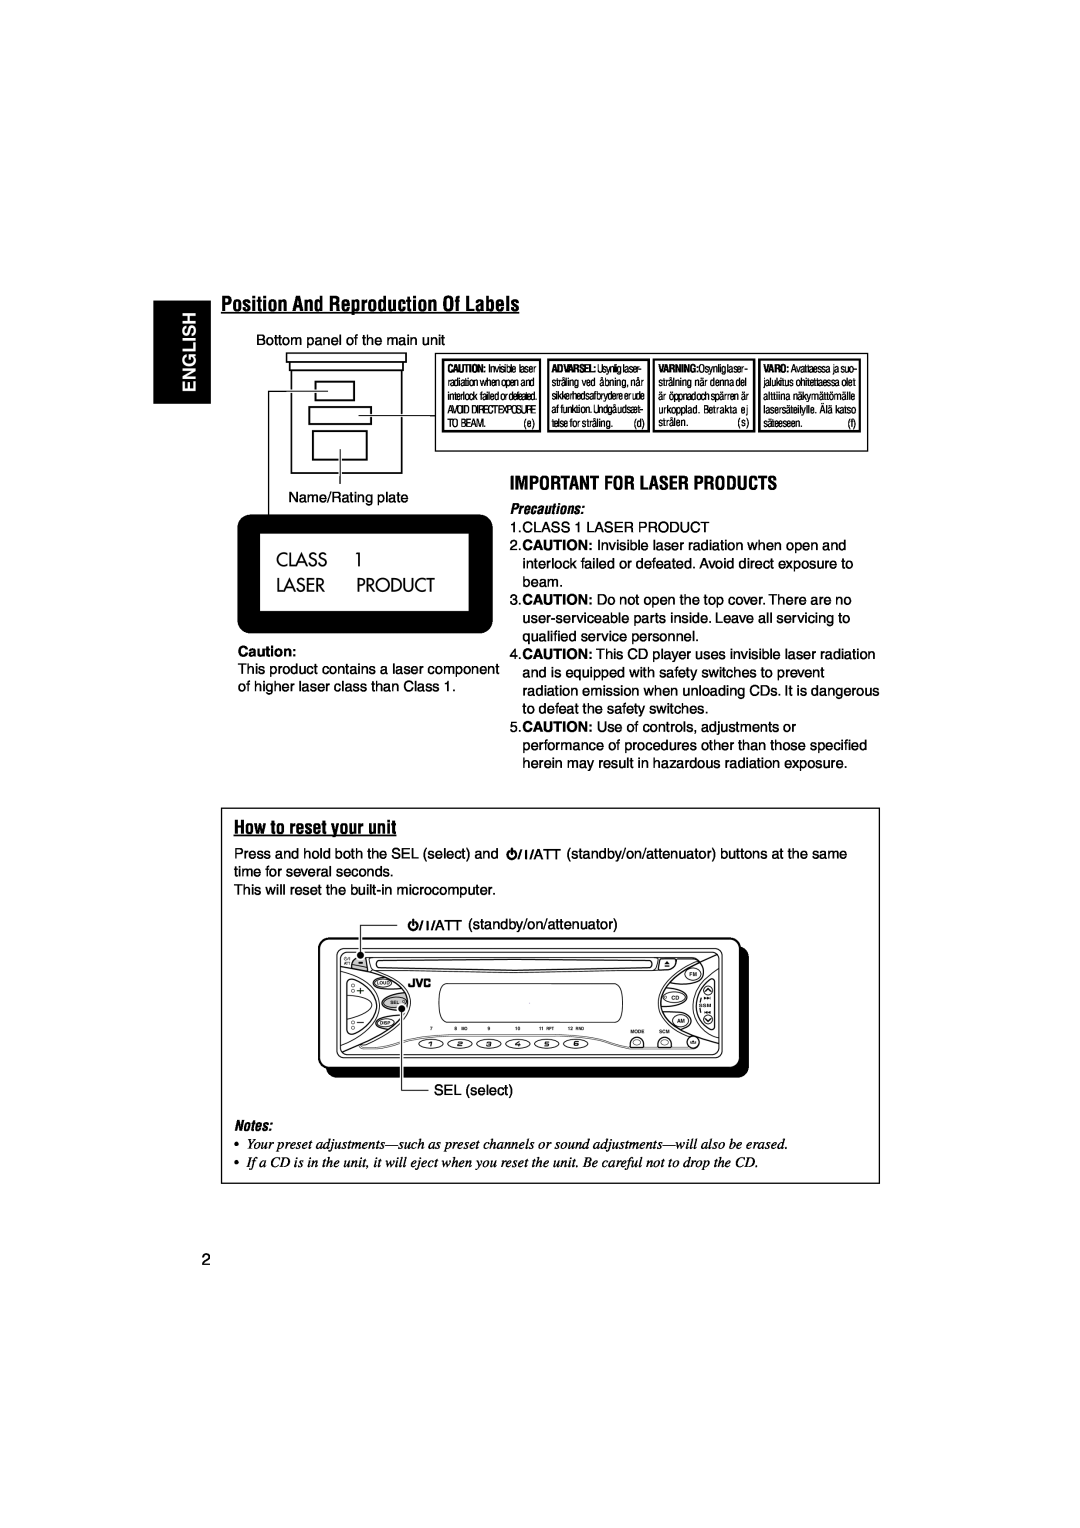 JVC KD-S641 manual Position And Reproduction Of Labels, English, Important For Laser Products, How to reset your unit 